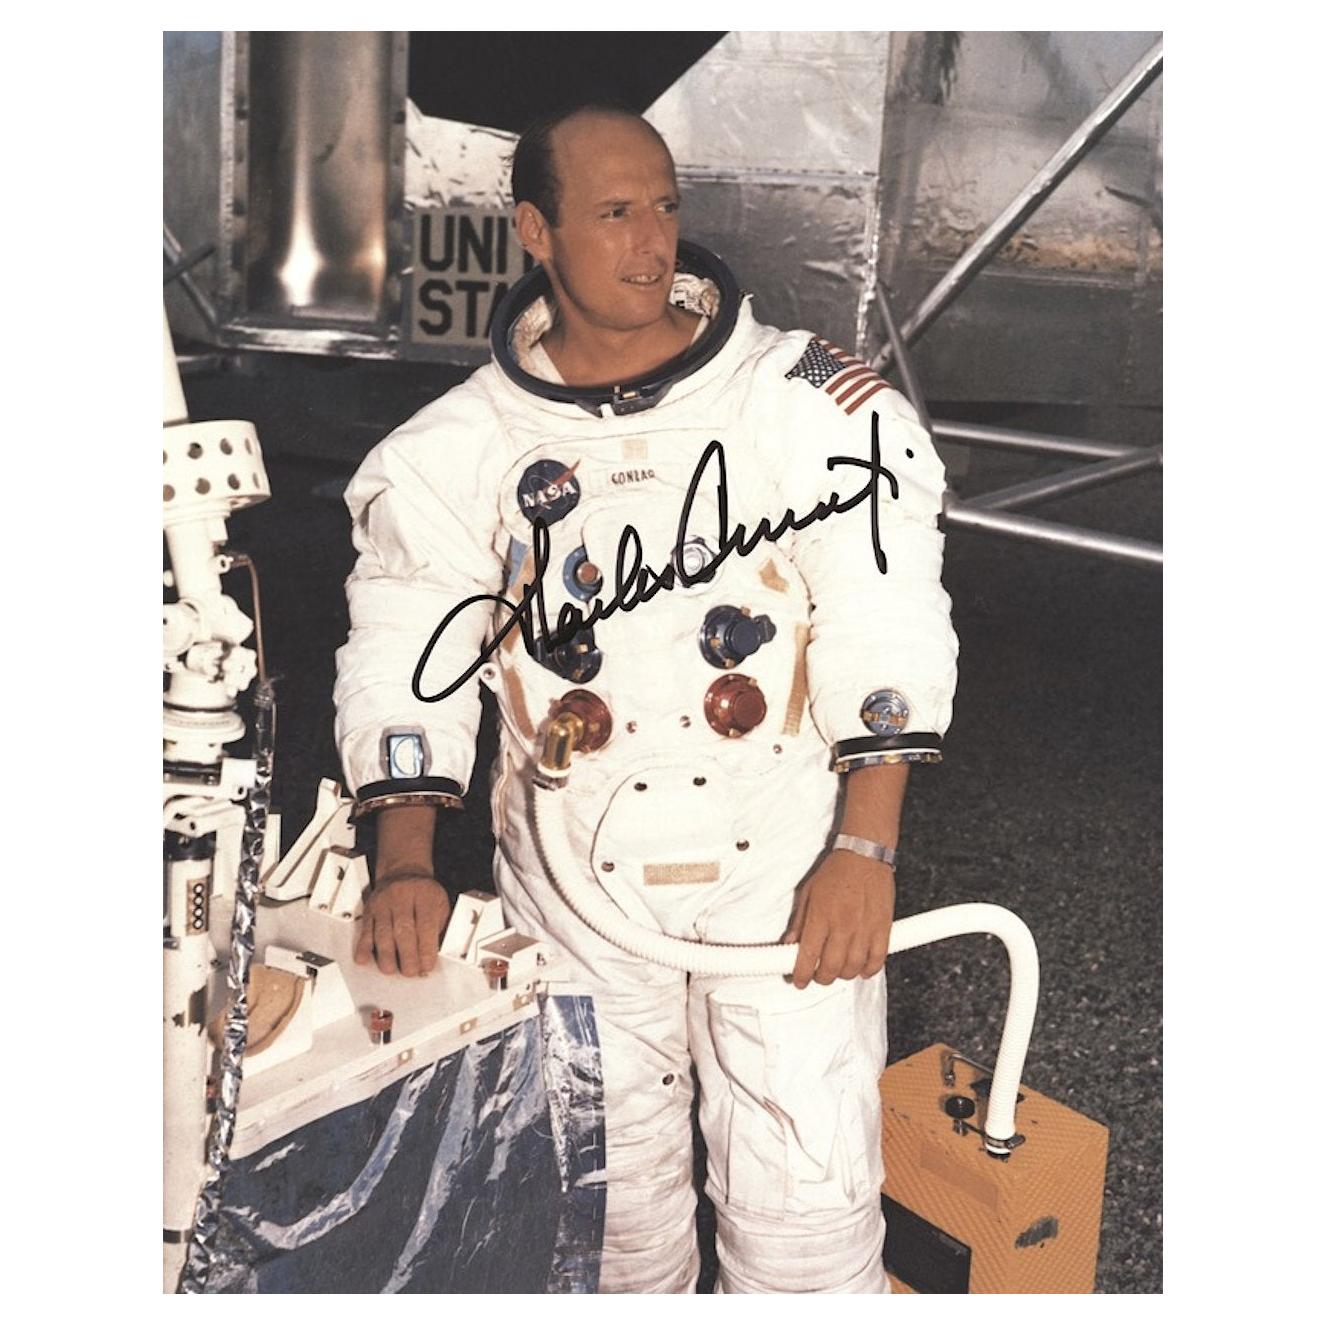 Pete Conrad Signed Photograph with Certificate of Authenticity